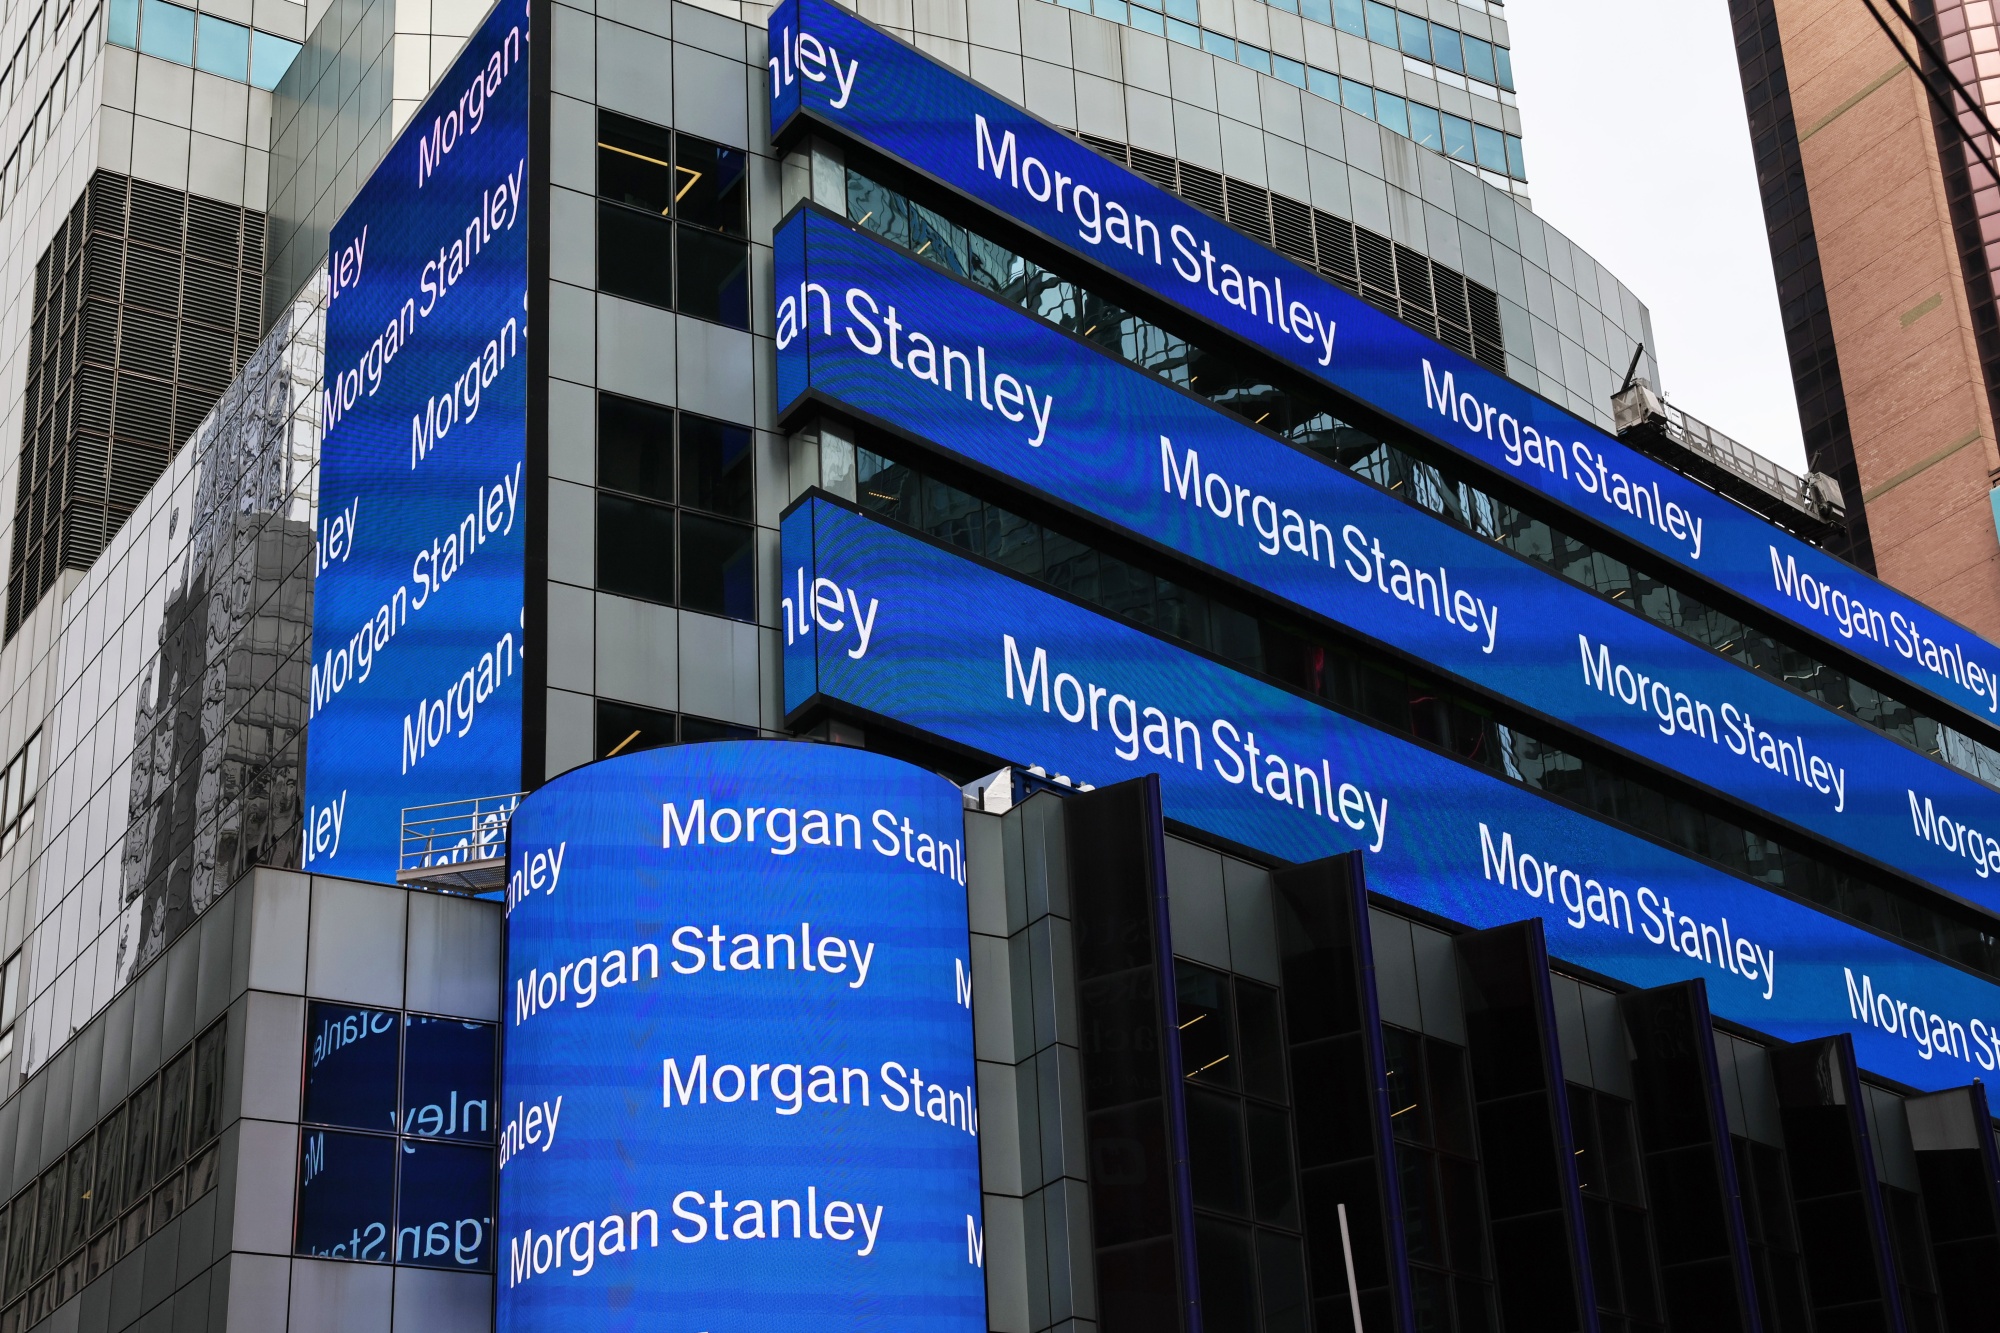 Morgan Stanley has upgraded India to ‘Overweight’ while downgrading China’s rating to ‘Equal-weight’